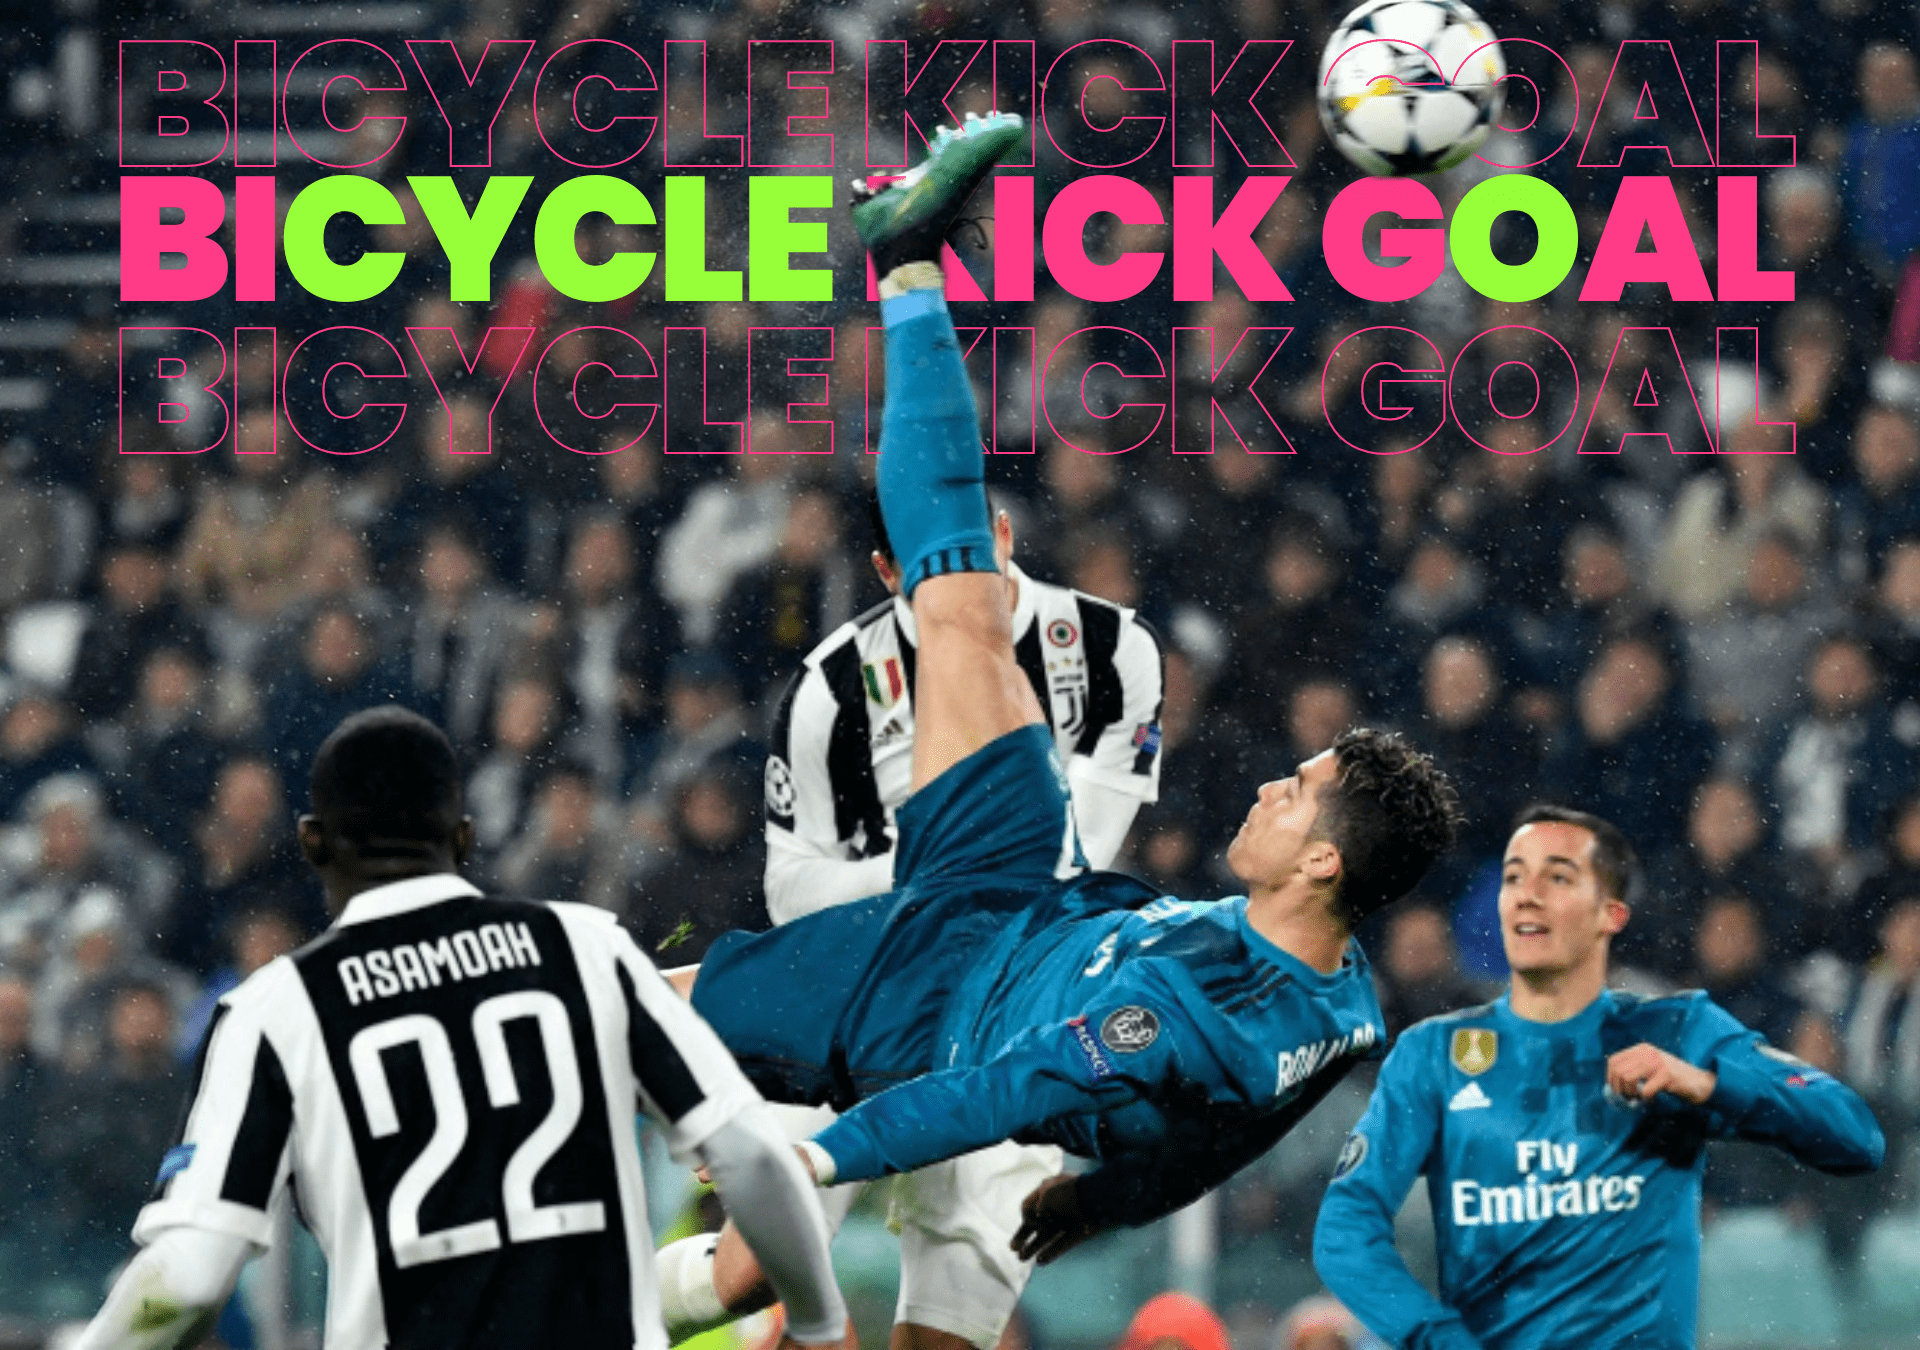 Read more about the article Cristiano Ronaldo bicycle kick goal at Juventus Stadium